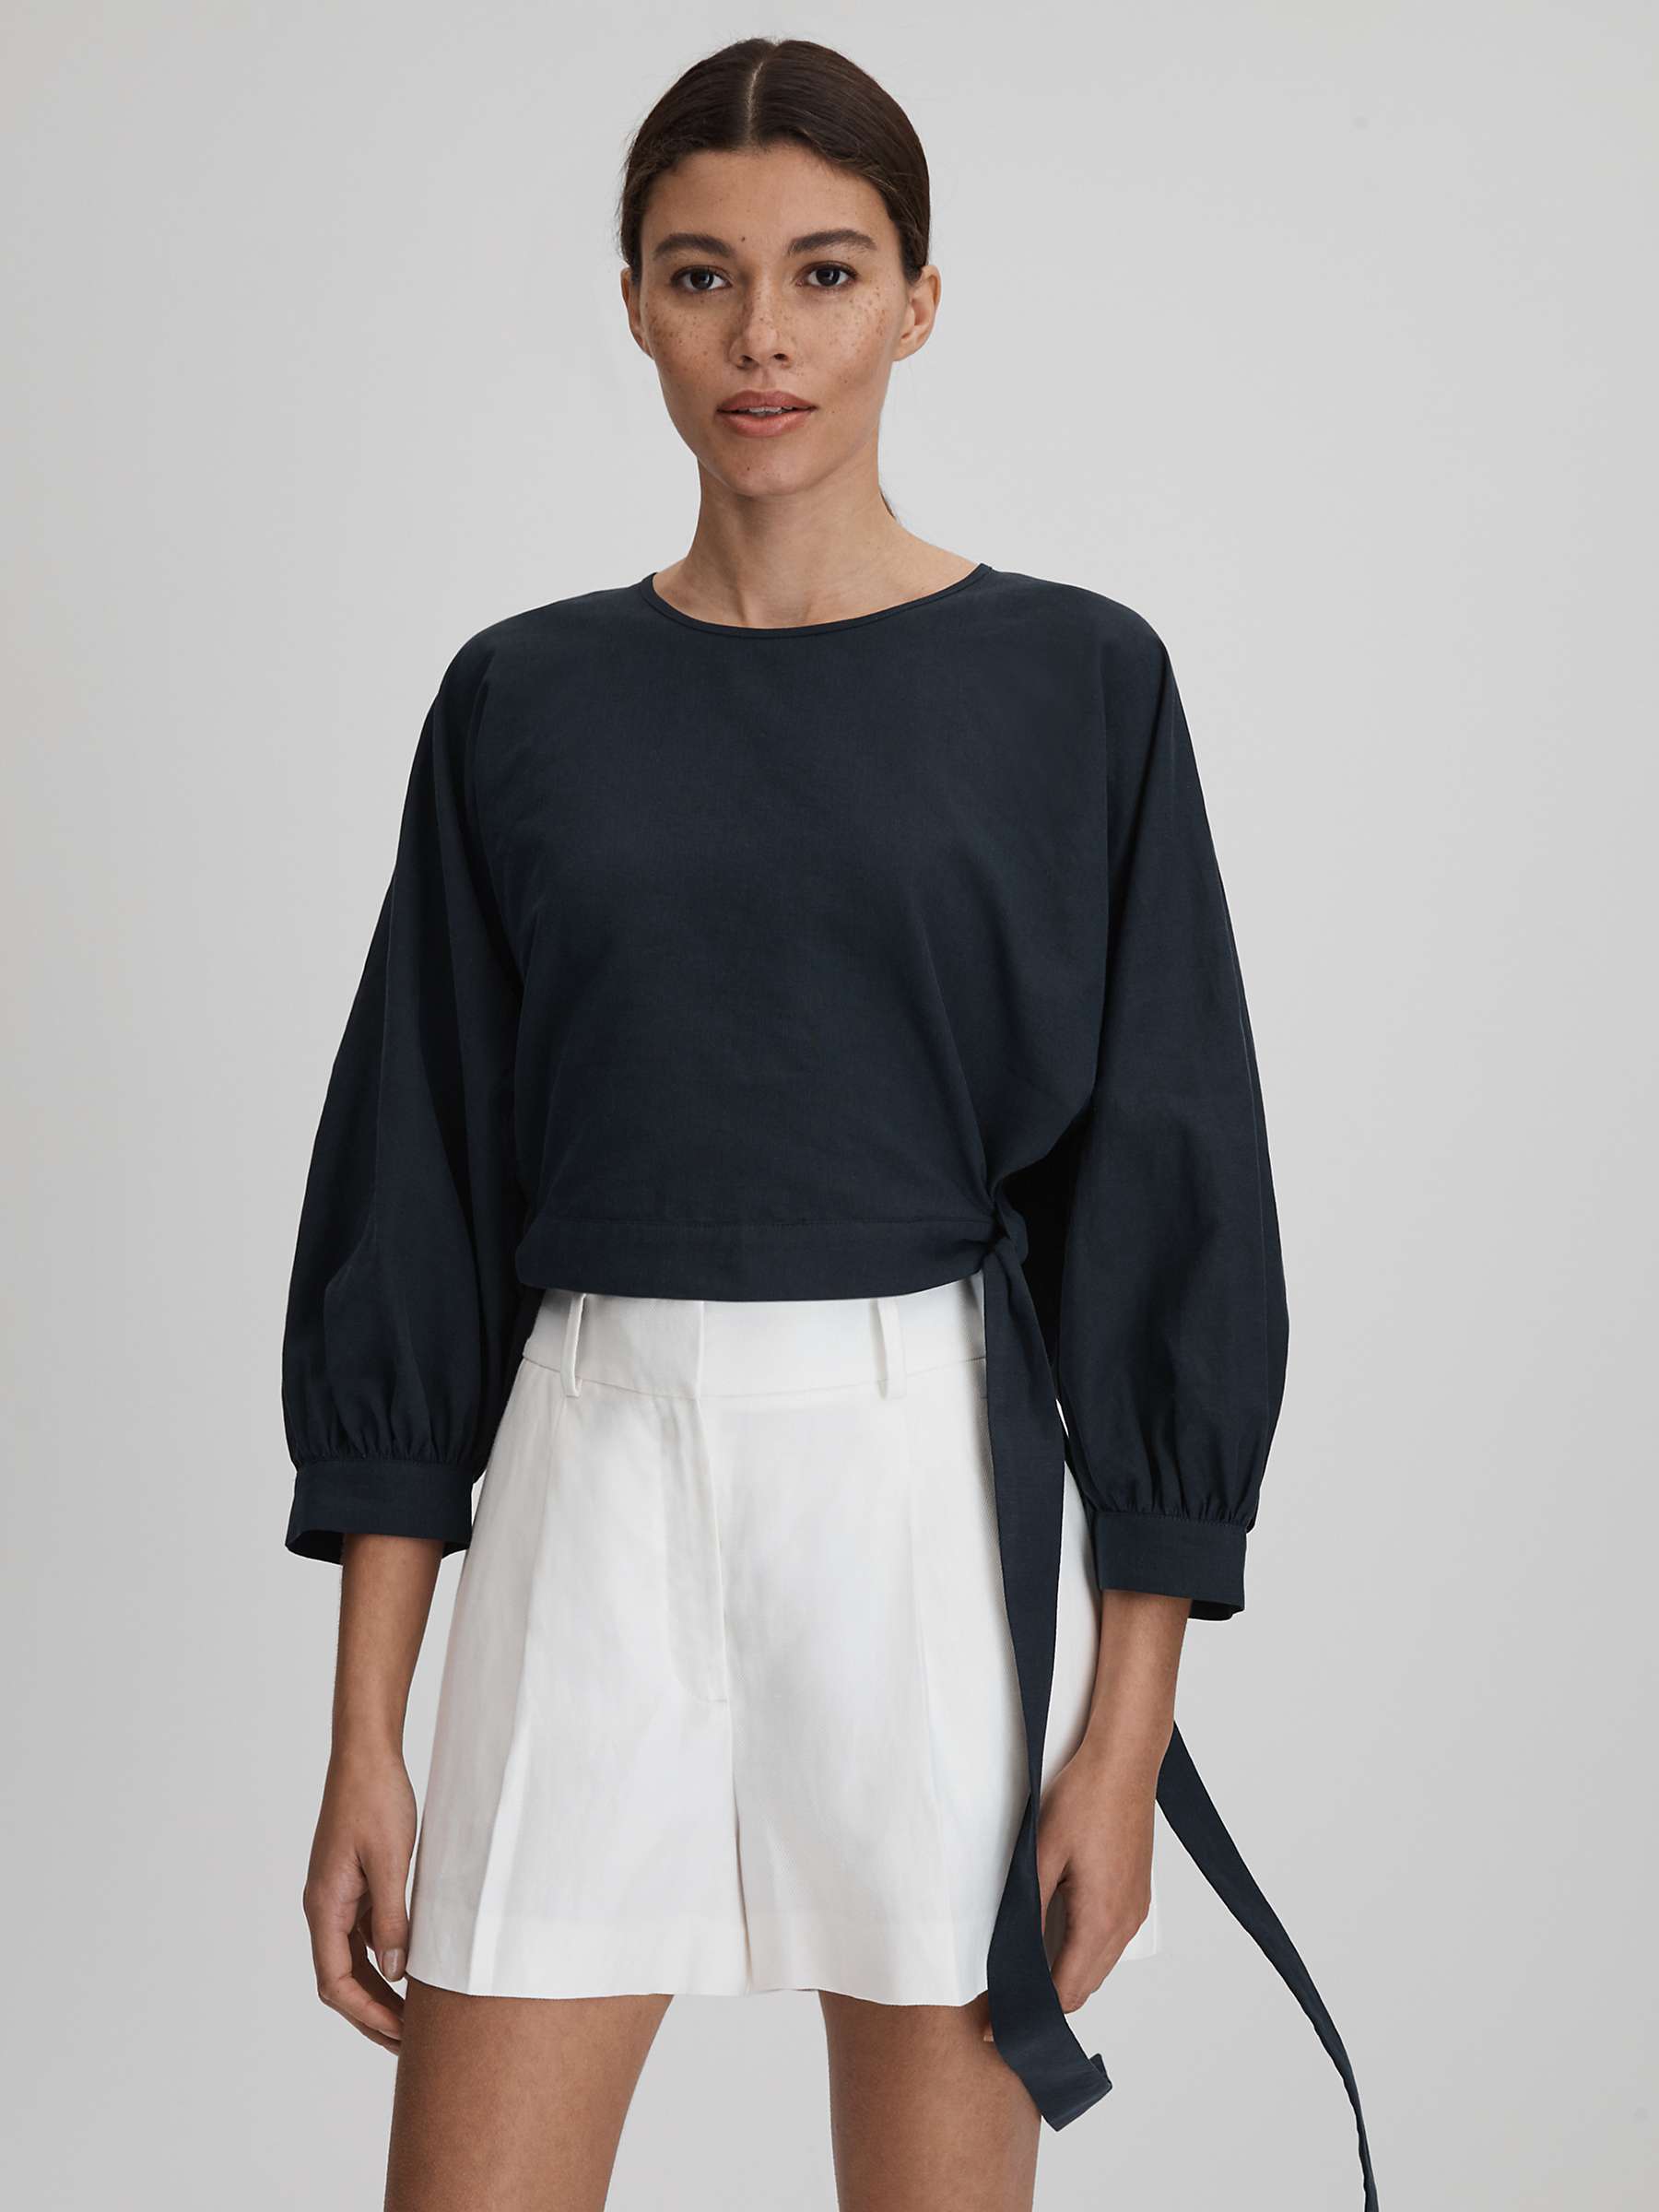 Buy Reiss Immy Cropped Blouson Sleeve Top Online at johnlewis.com